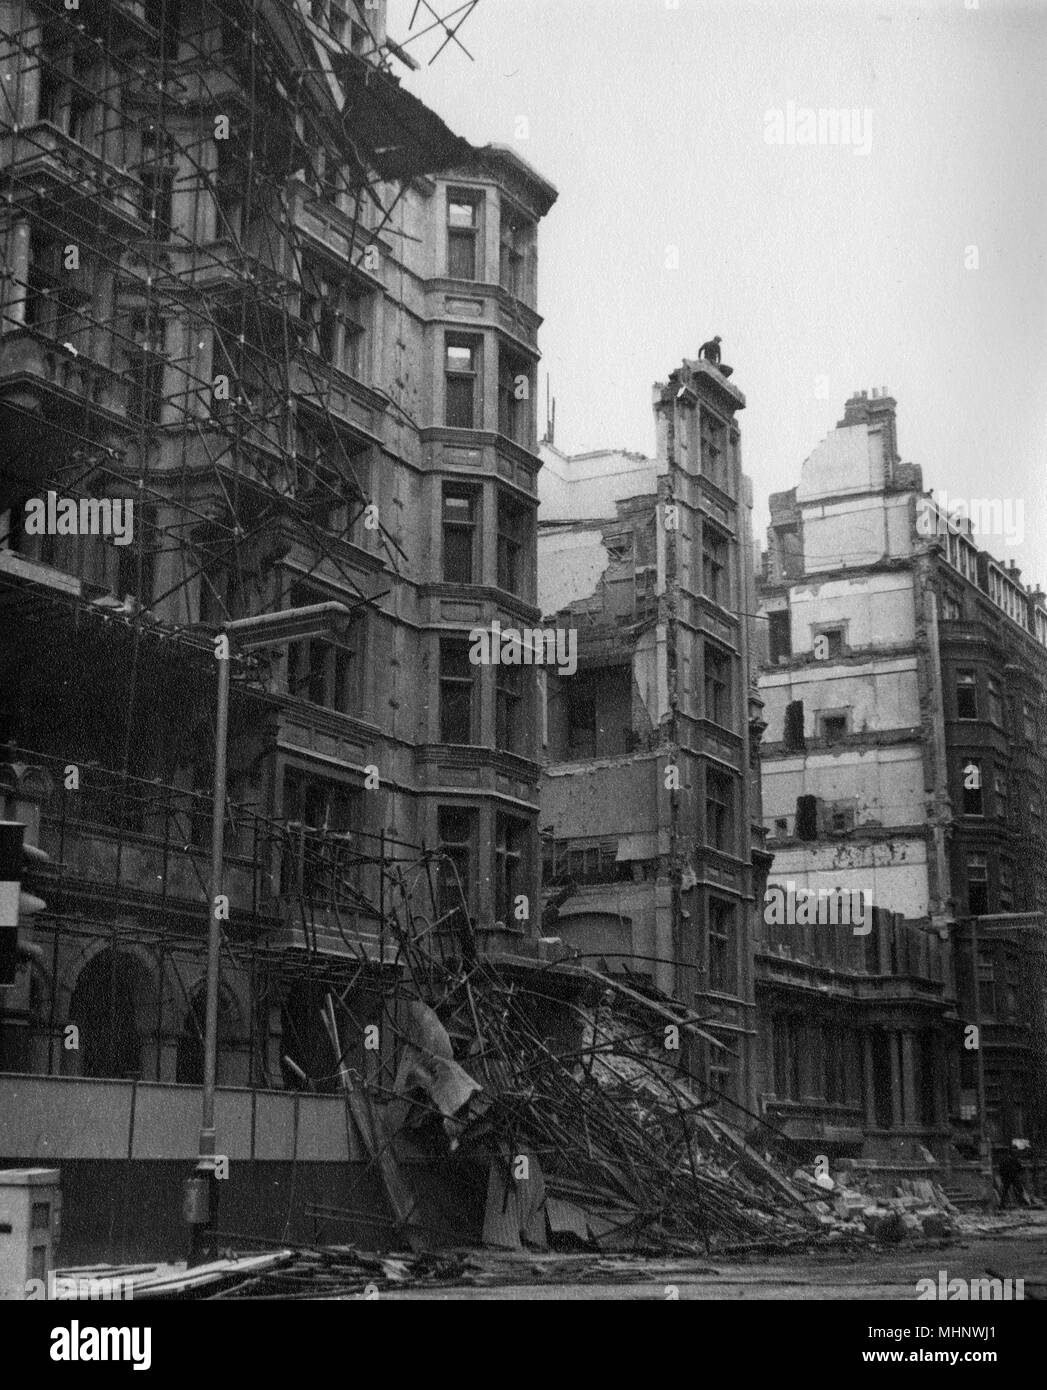 London - Buildings on Victoria Street / Broadway which collapsed due to demolition work - December 12th 1963. Rescue workers initially feared workmen to be trapped amid the rubble but thankfully this was not the case.     Date: 1963 Stock Photo